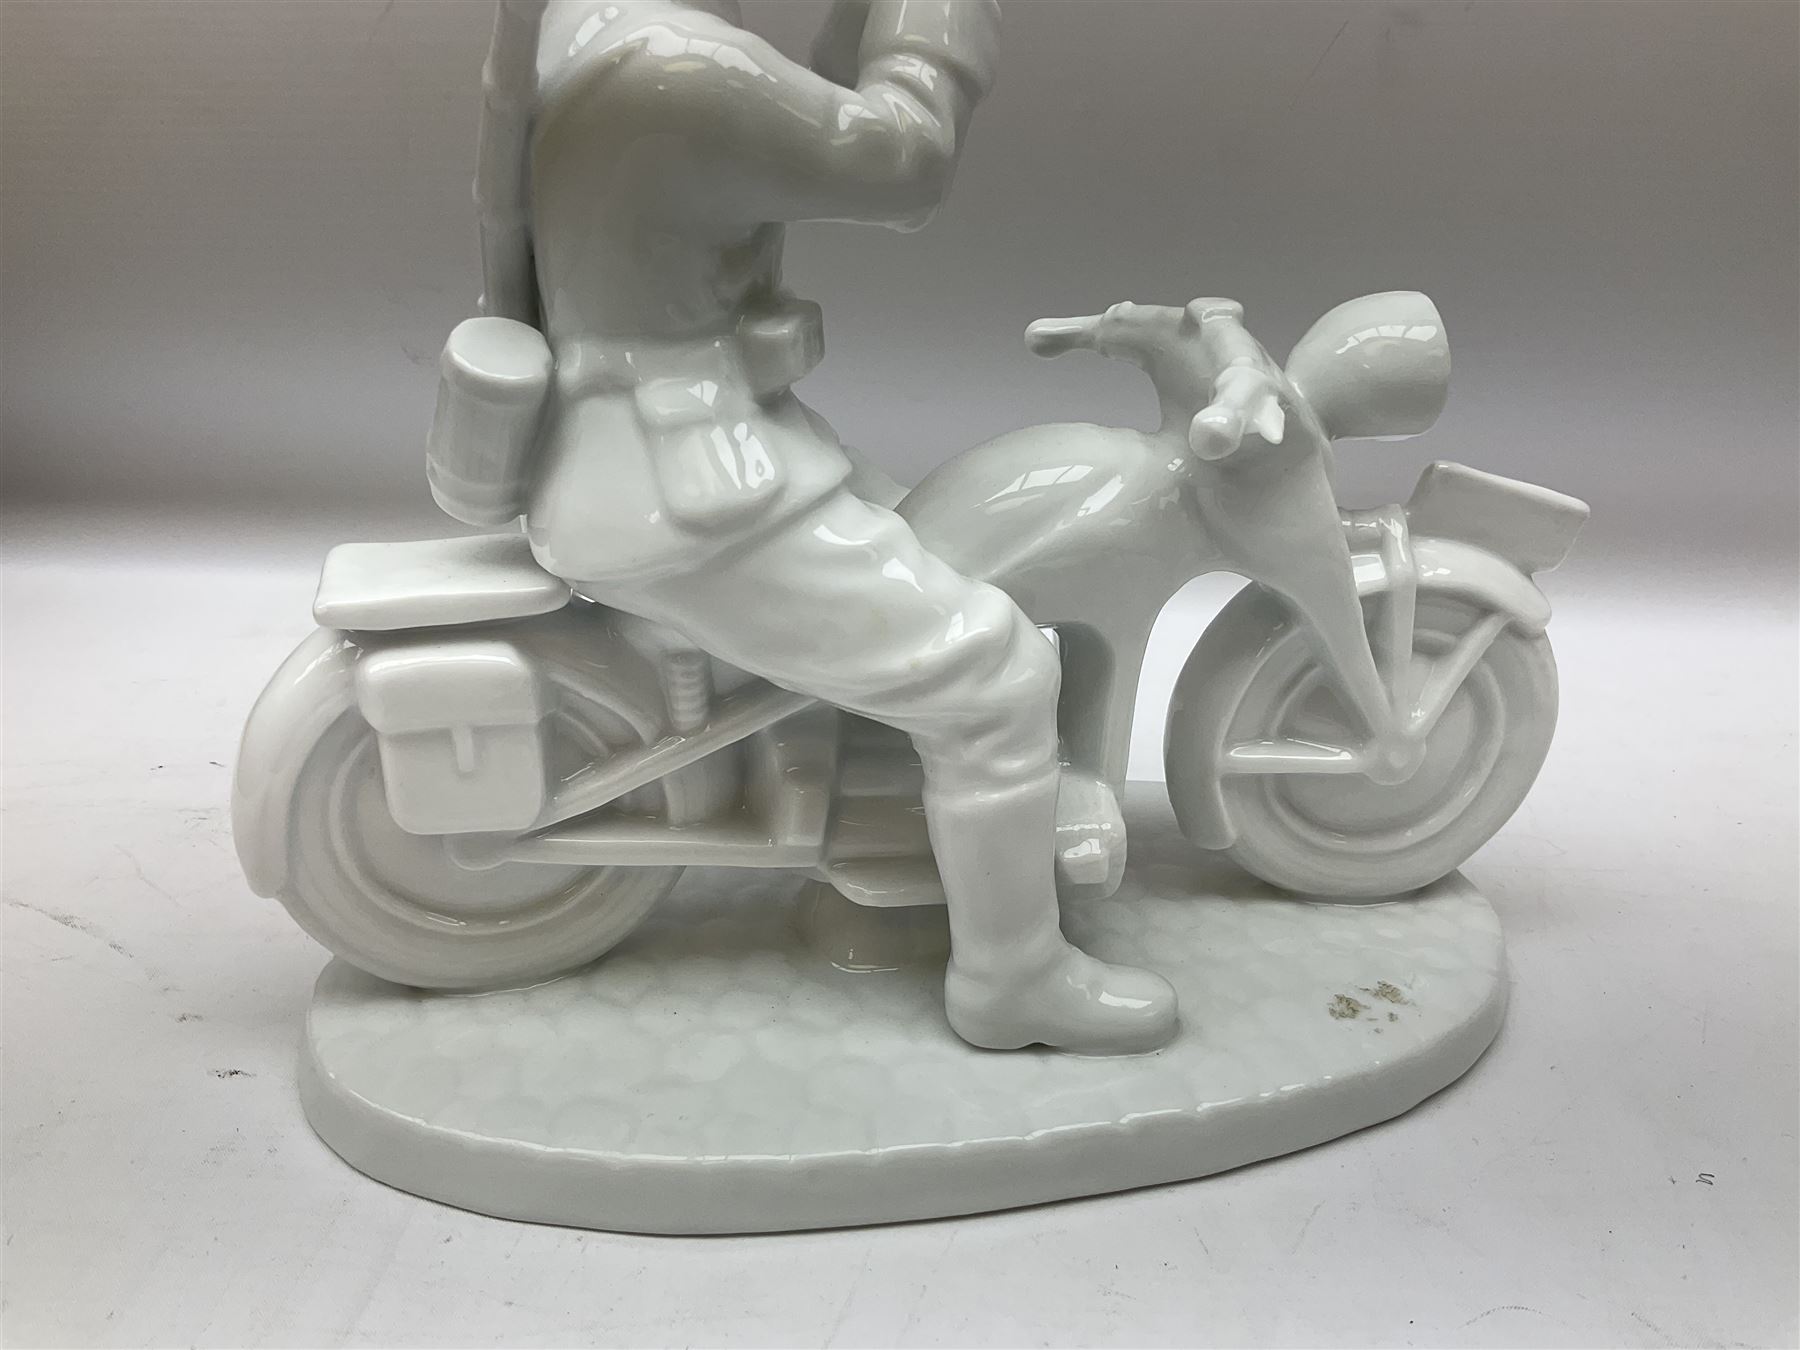 Neundorf figure modelled as a soldier seated upon a stationary motorcycle looking through binoculars - Image 4 of 8